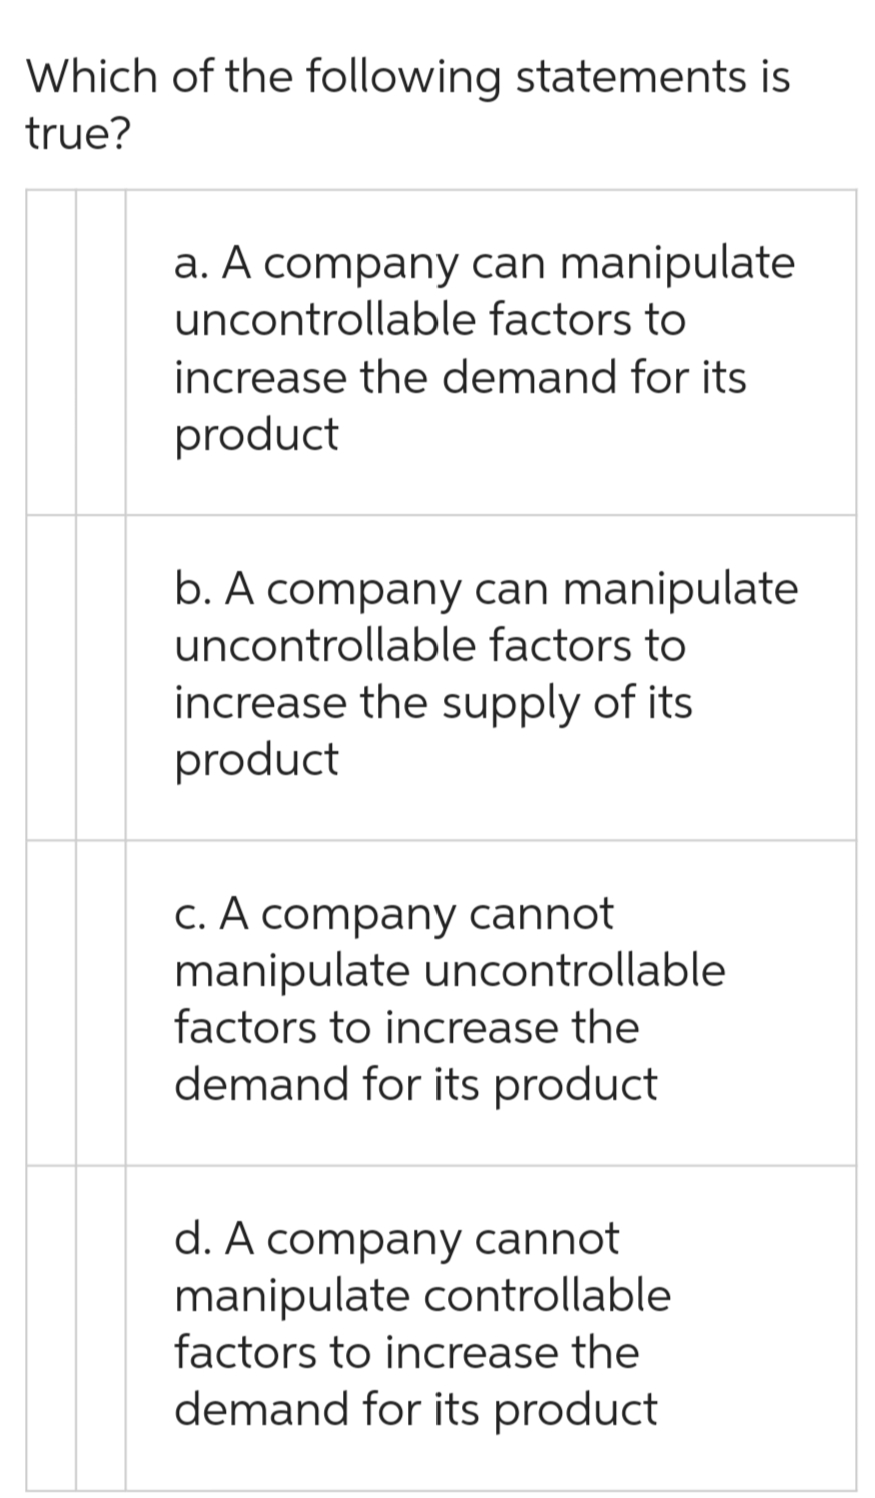 Which of the following statements is
true?
a. A company can manipulate
uncontrollable factors to
increase the demand for its
product
b. A company can manipulate
uncontrollable factors to
increase the supply of its
product
c. A company cannot
manipulate uncontrollable
factors to increase the
demand for its product
d. A company cannot
manipulate controllable
factors to increase the
demand for its product